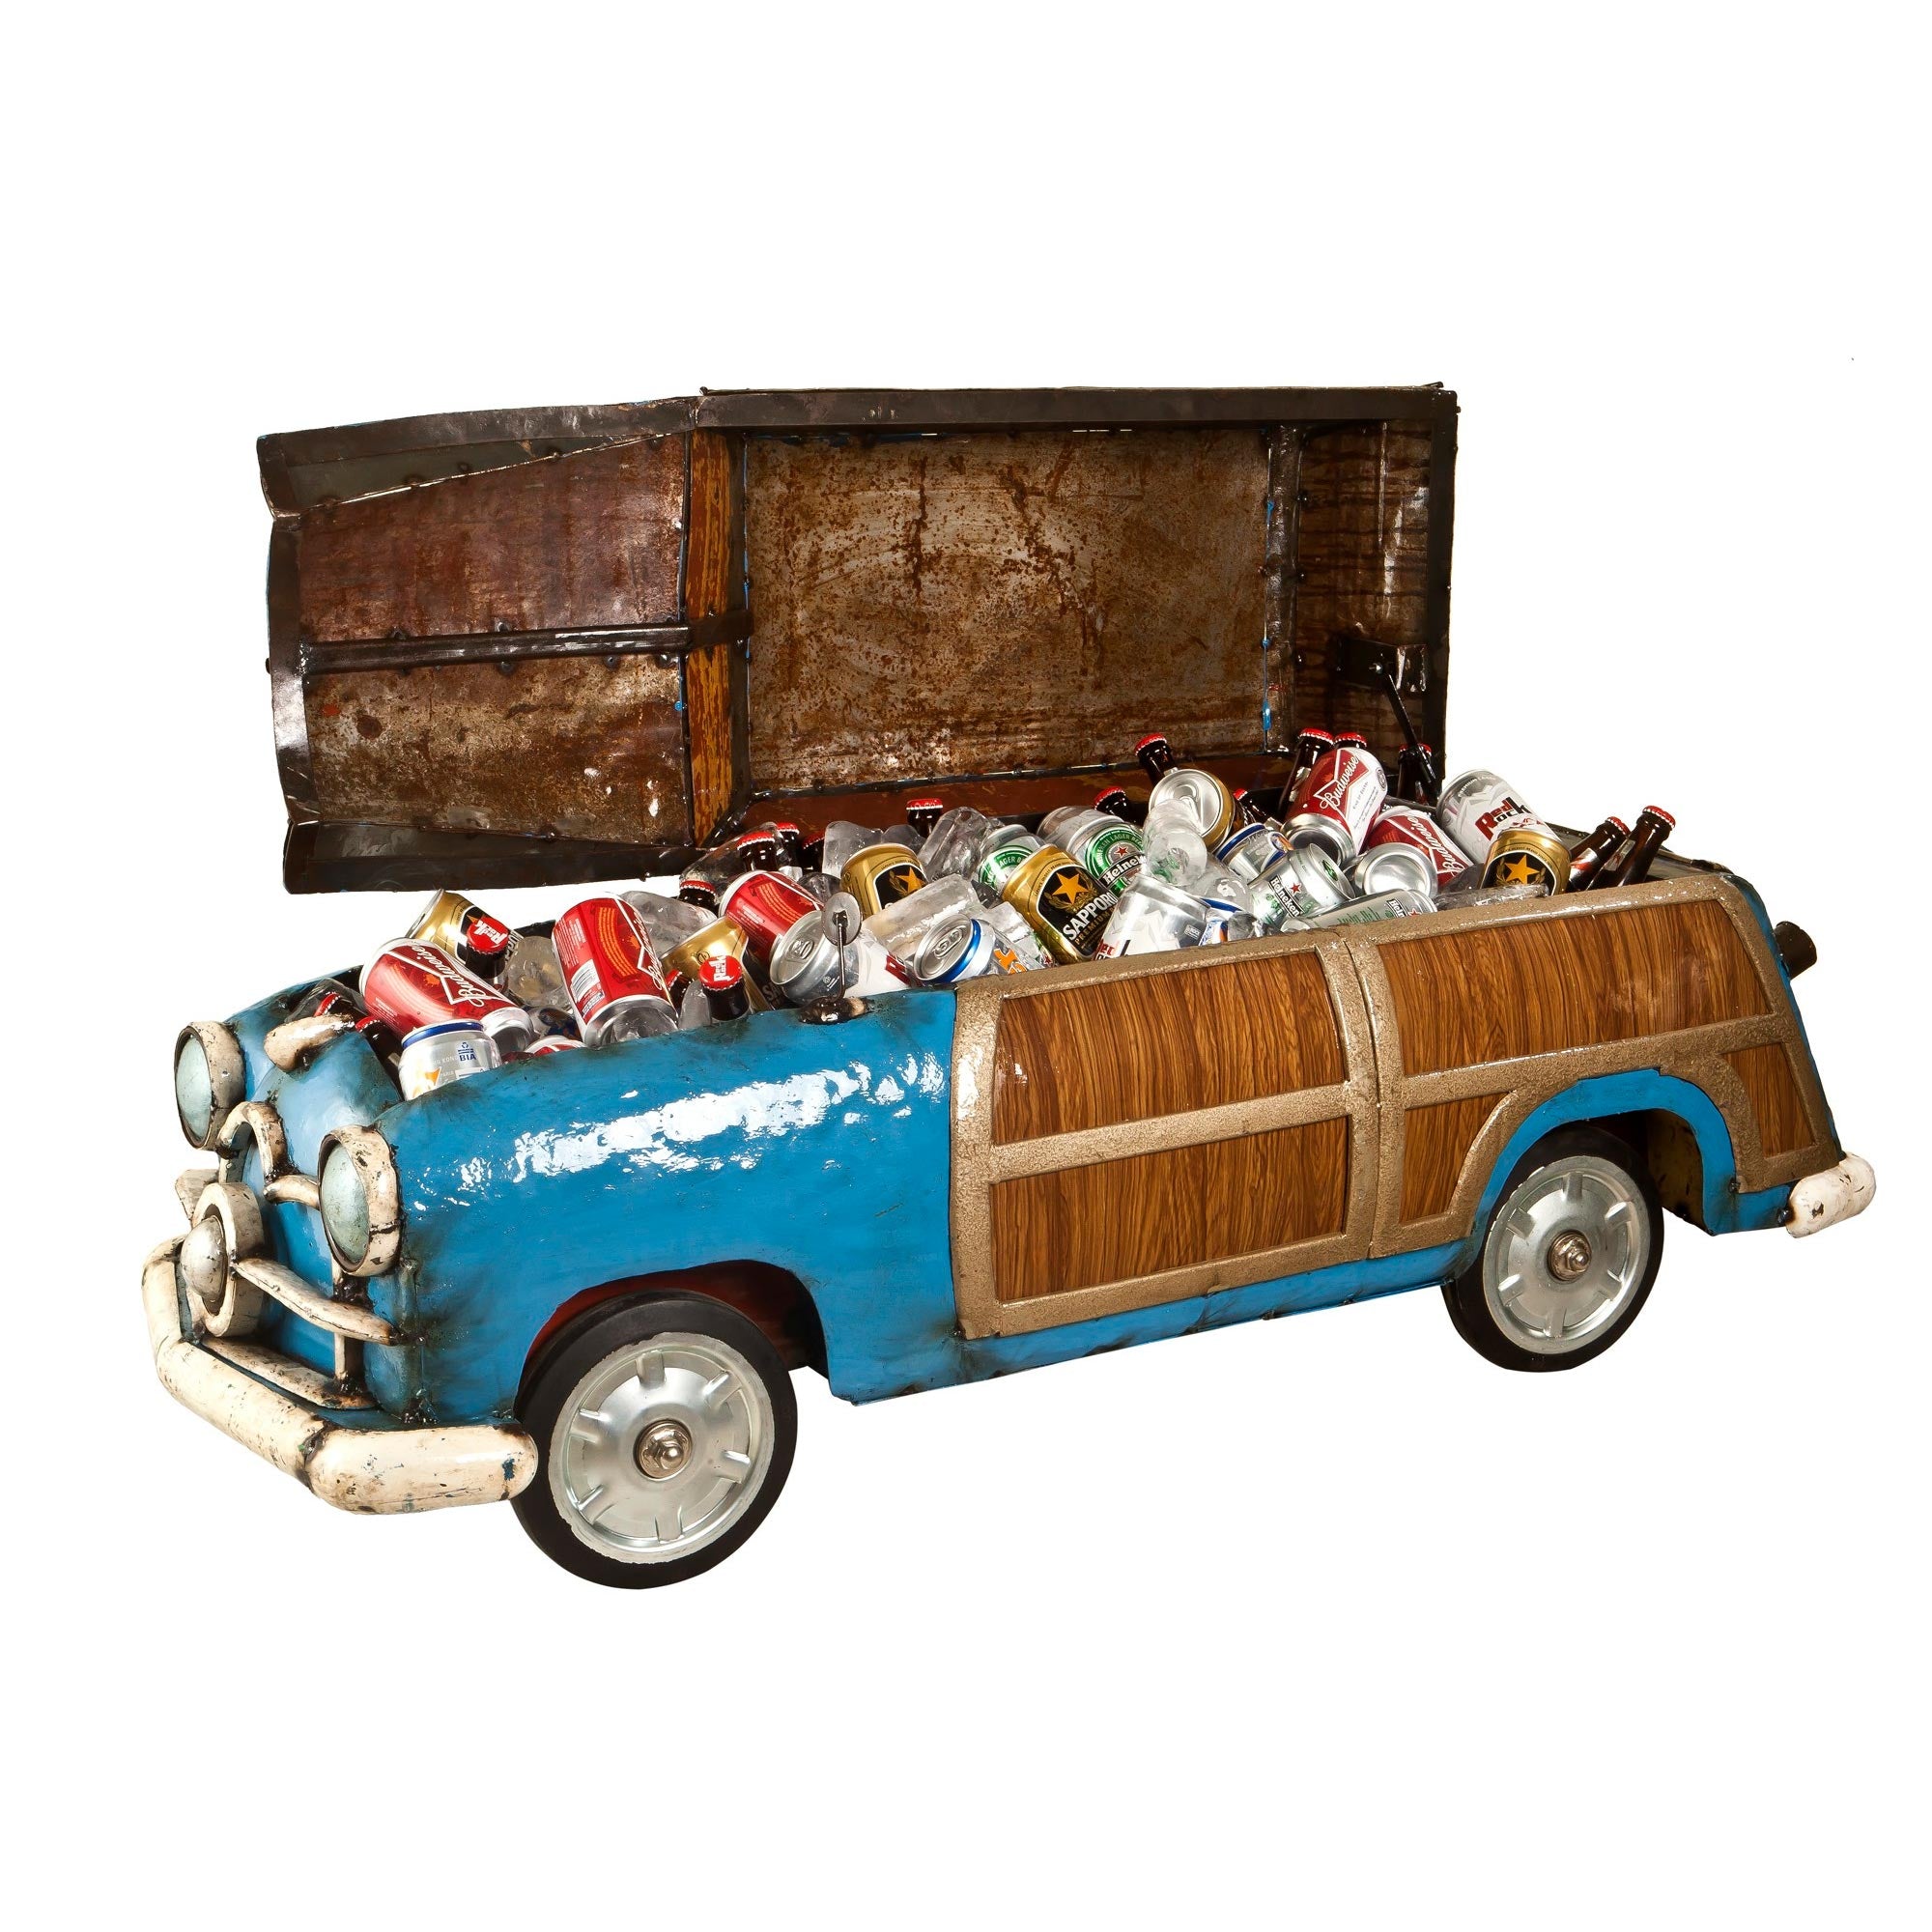 The Woody Beverage Cooler - Red